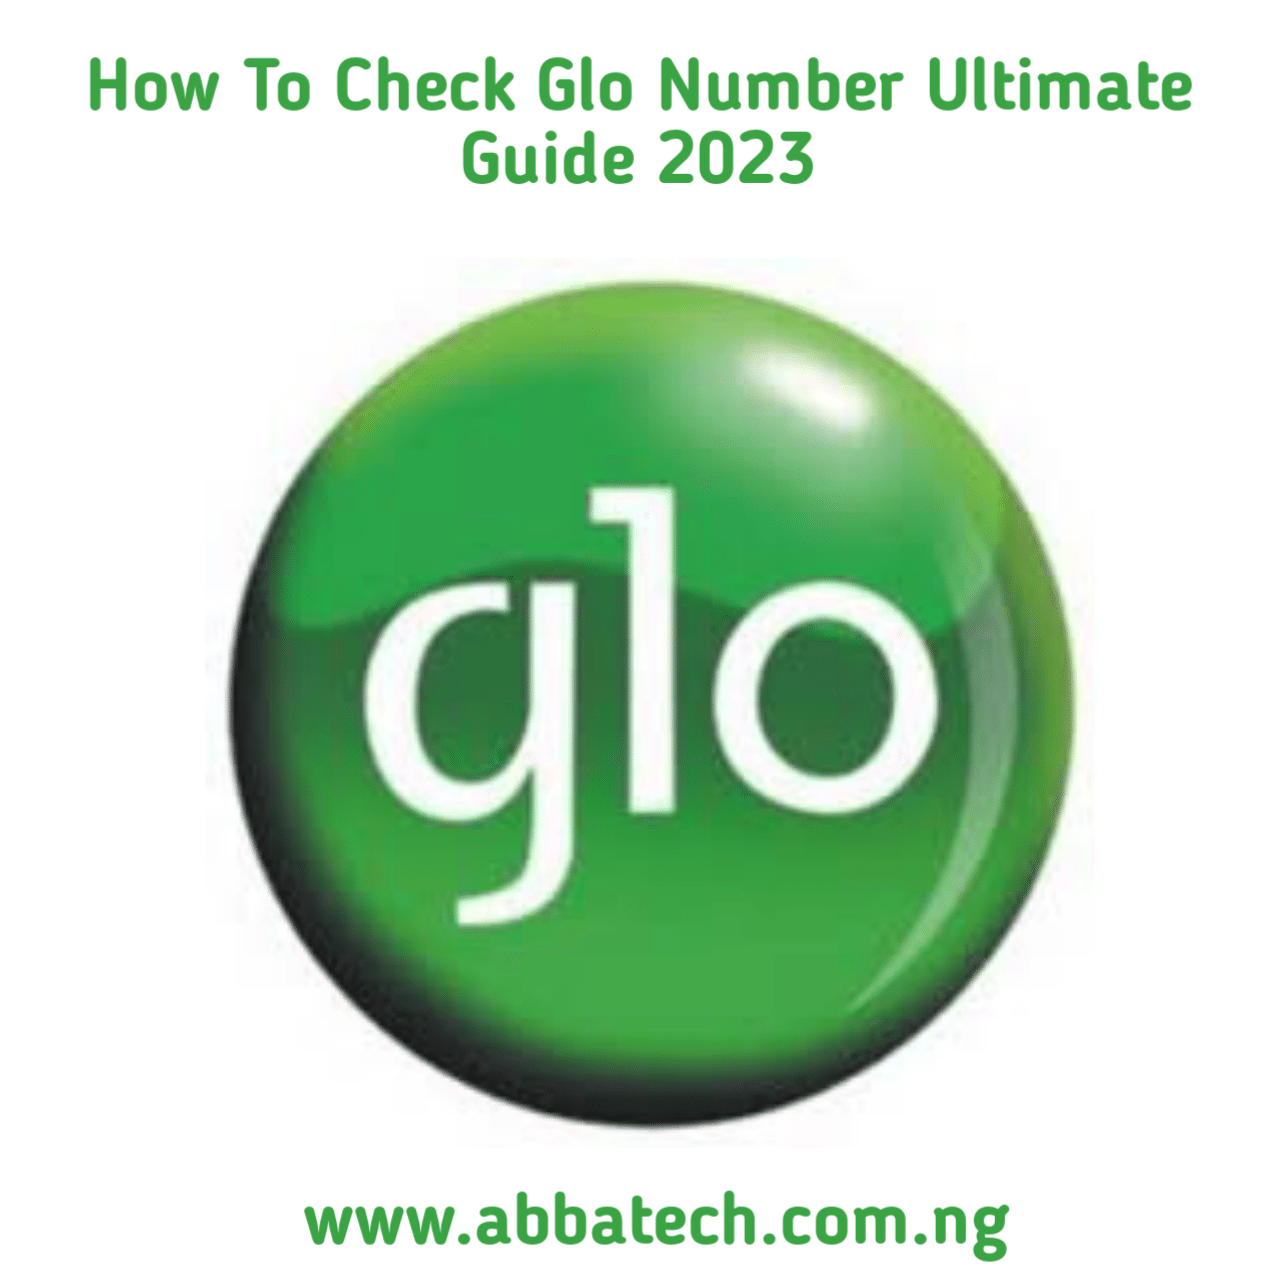 How To Check Glo Number, Ultimate Guide 2023